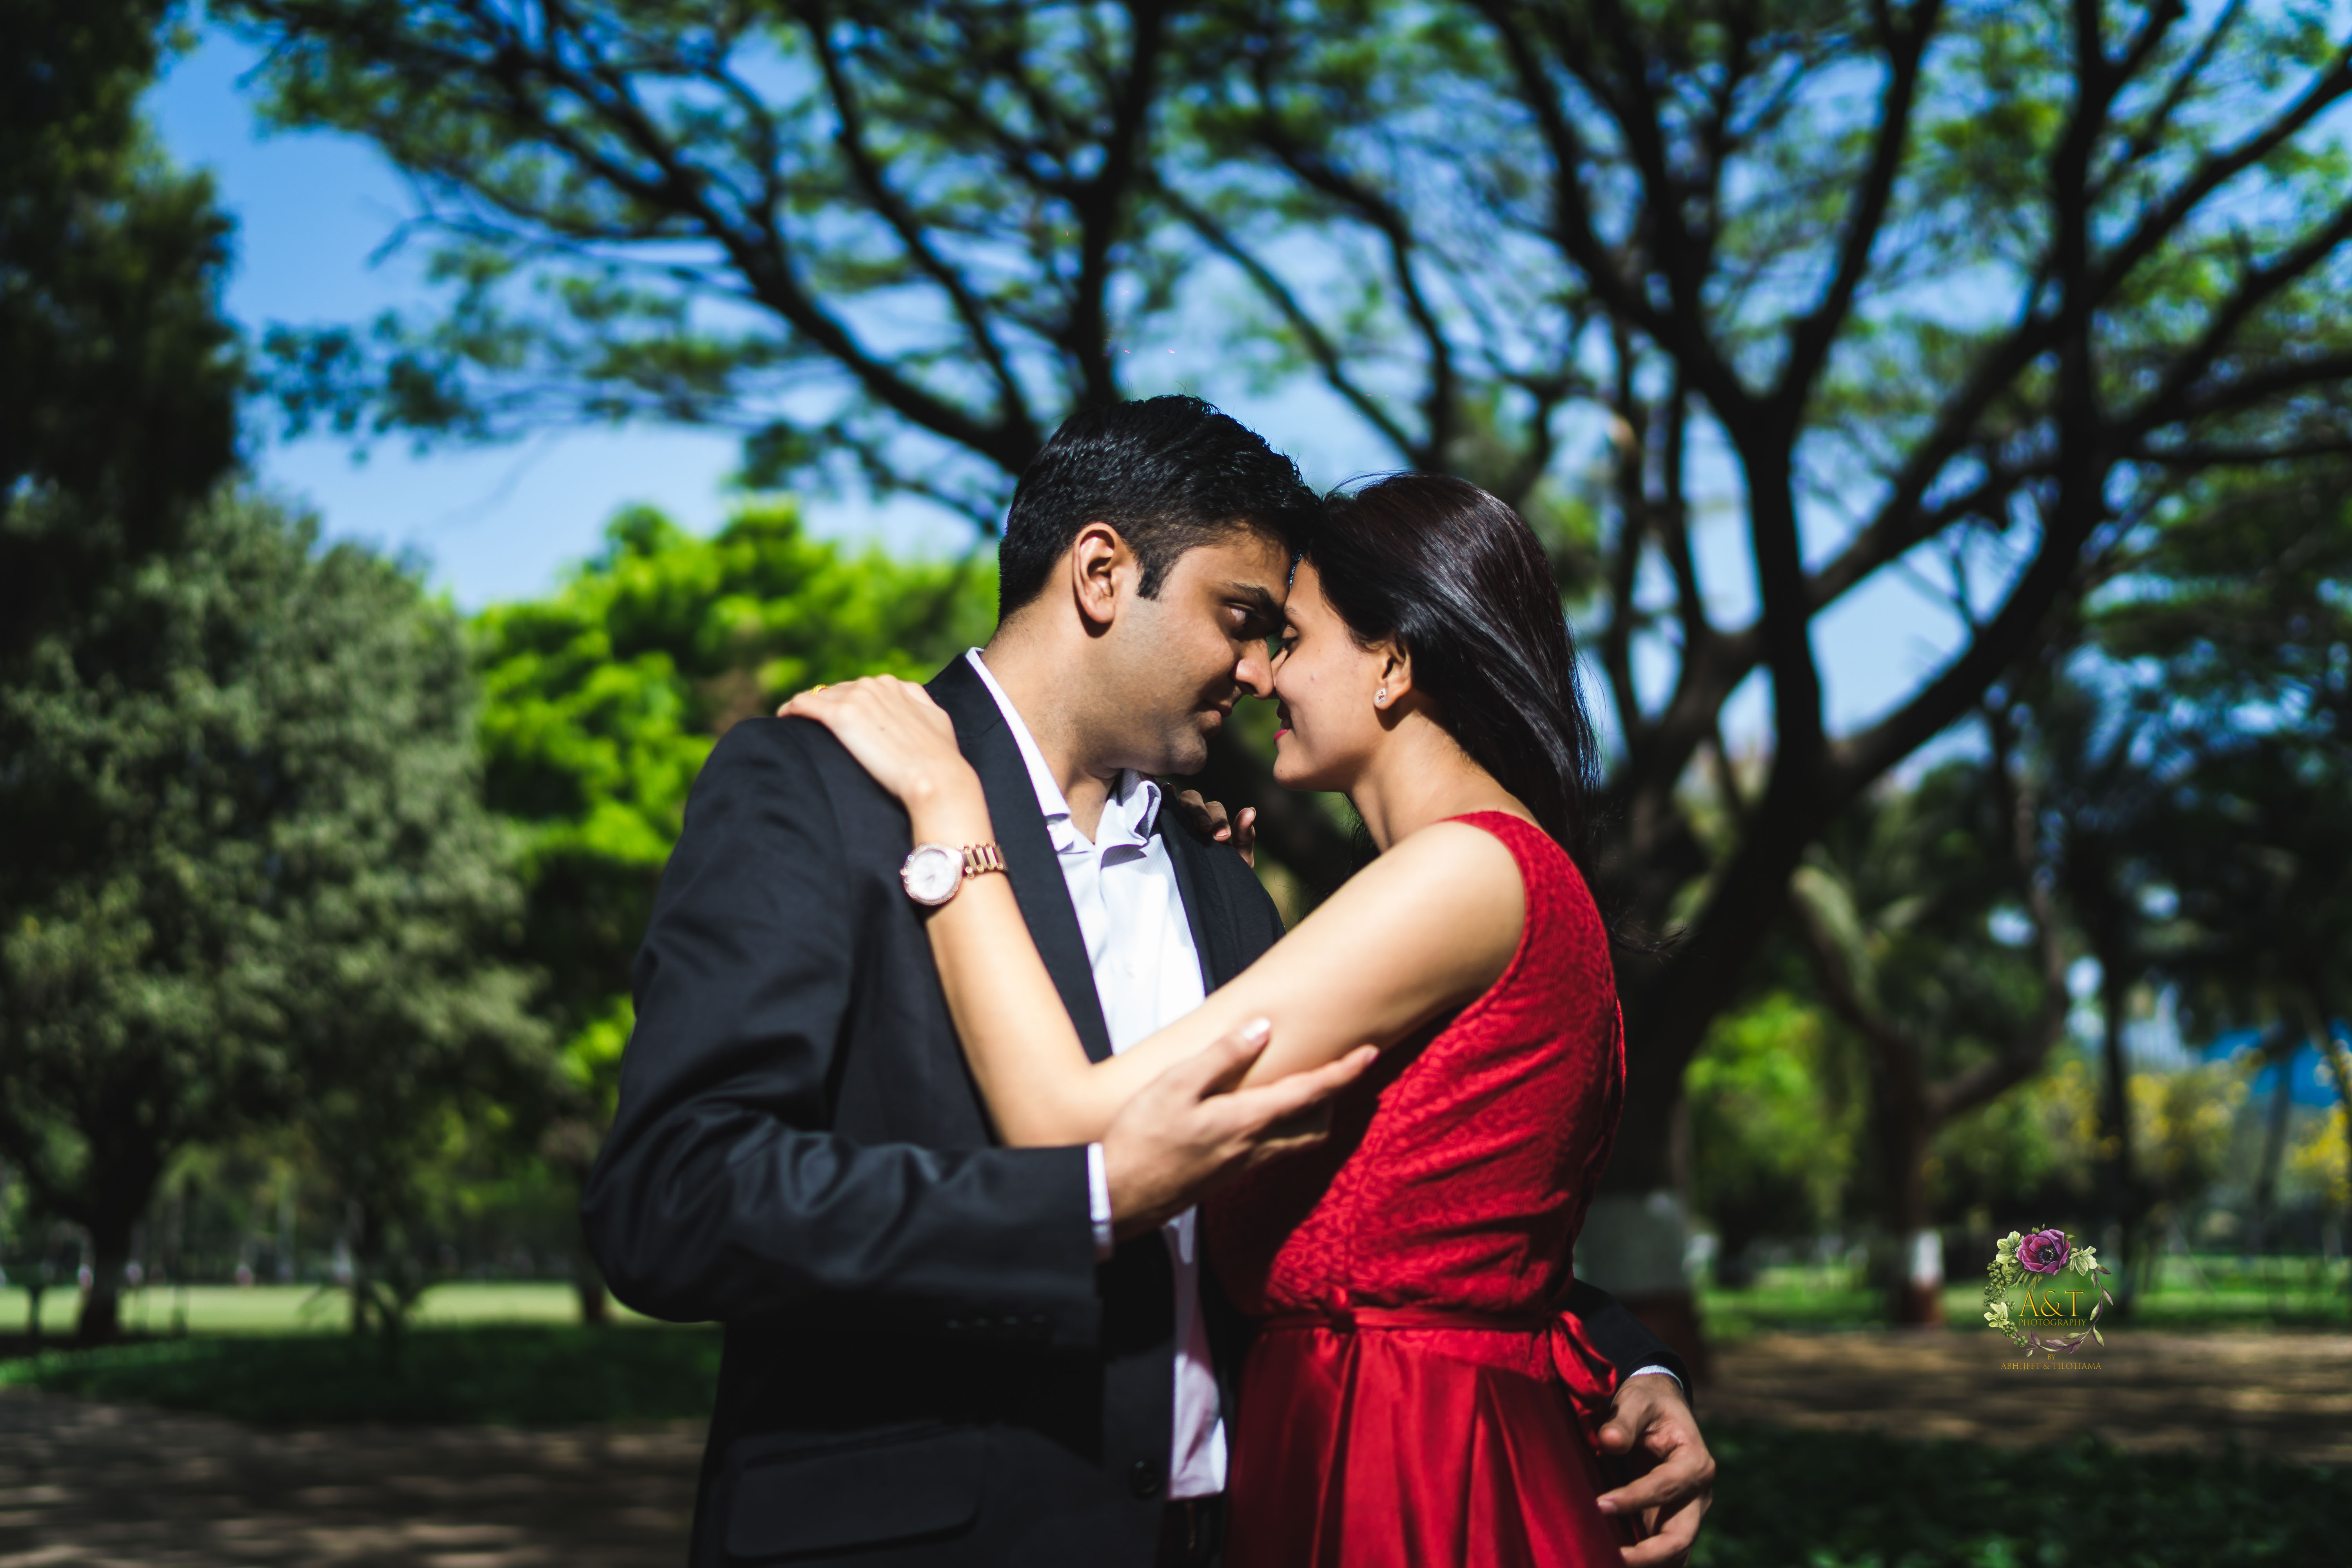 Intimate Pre-wedding Poses from the best Pre-wedding Photoshoot of Priyanka and Swijal in Pune